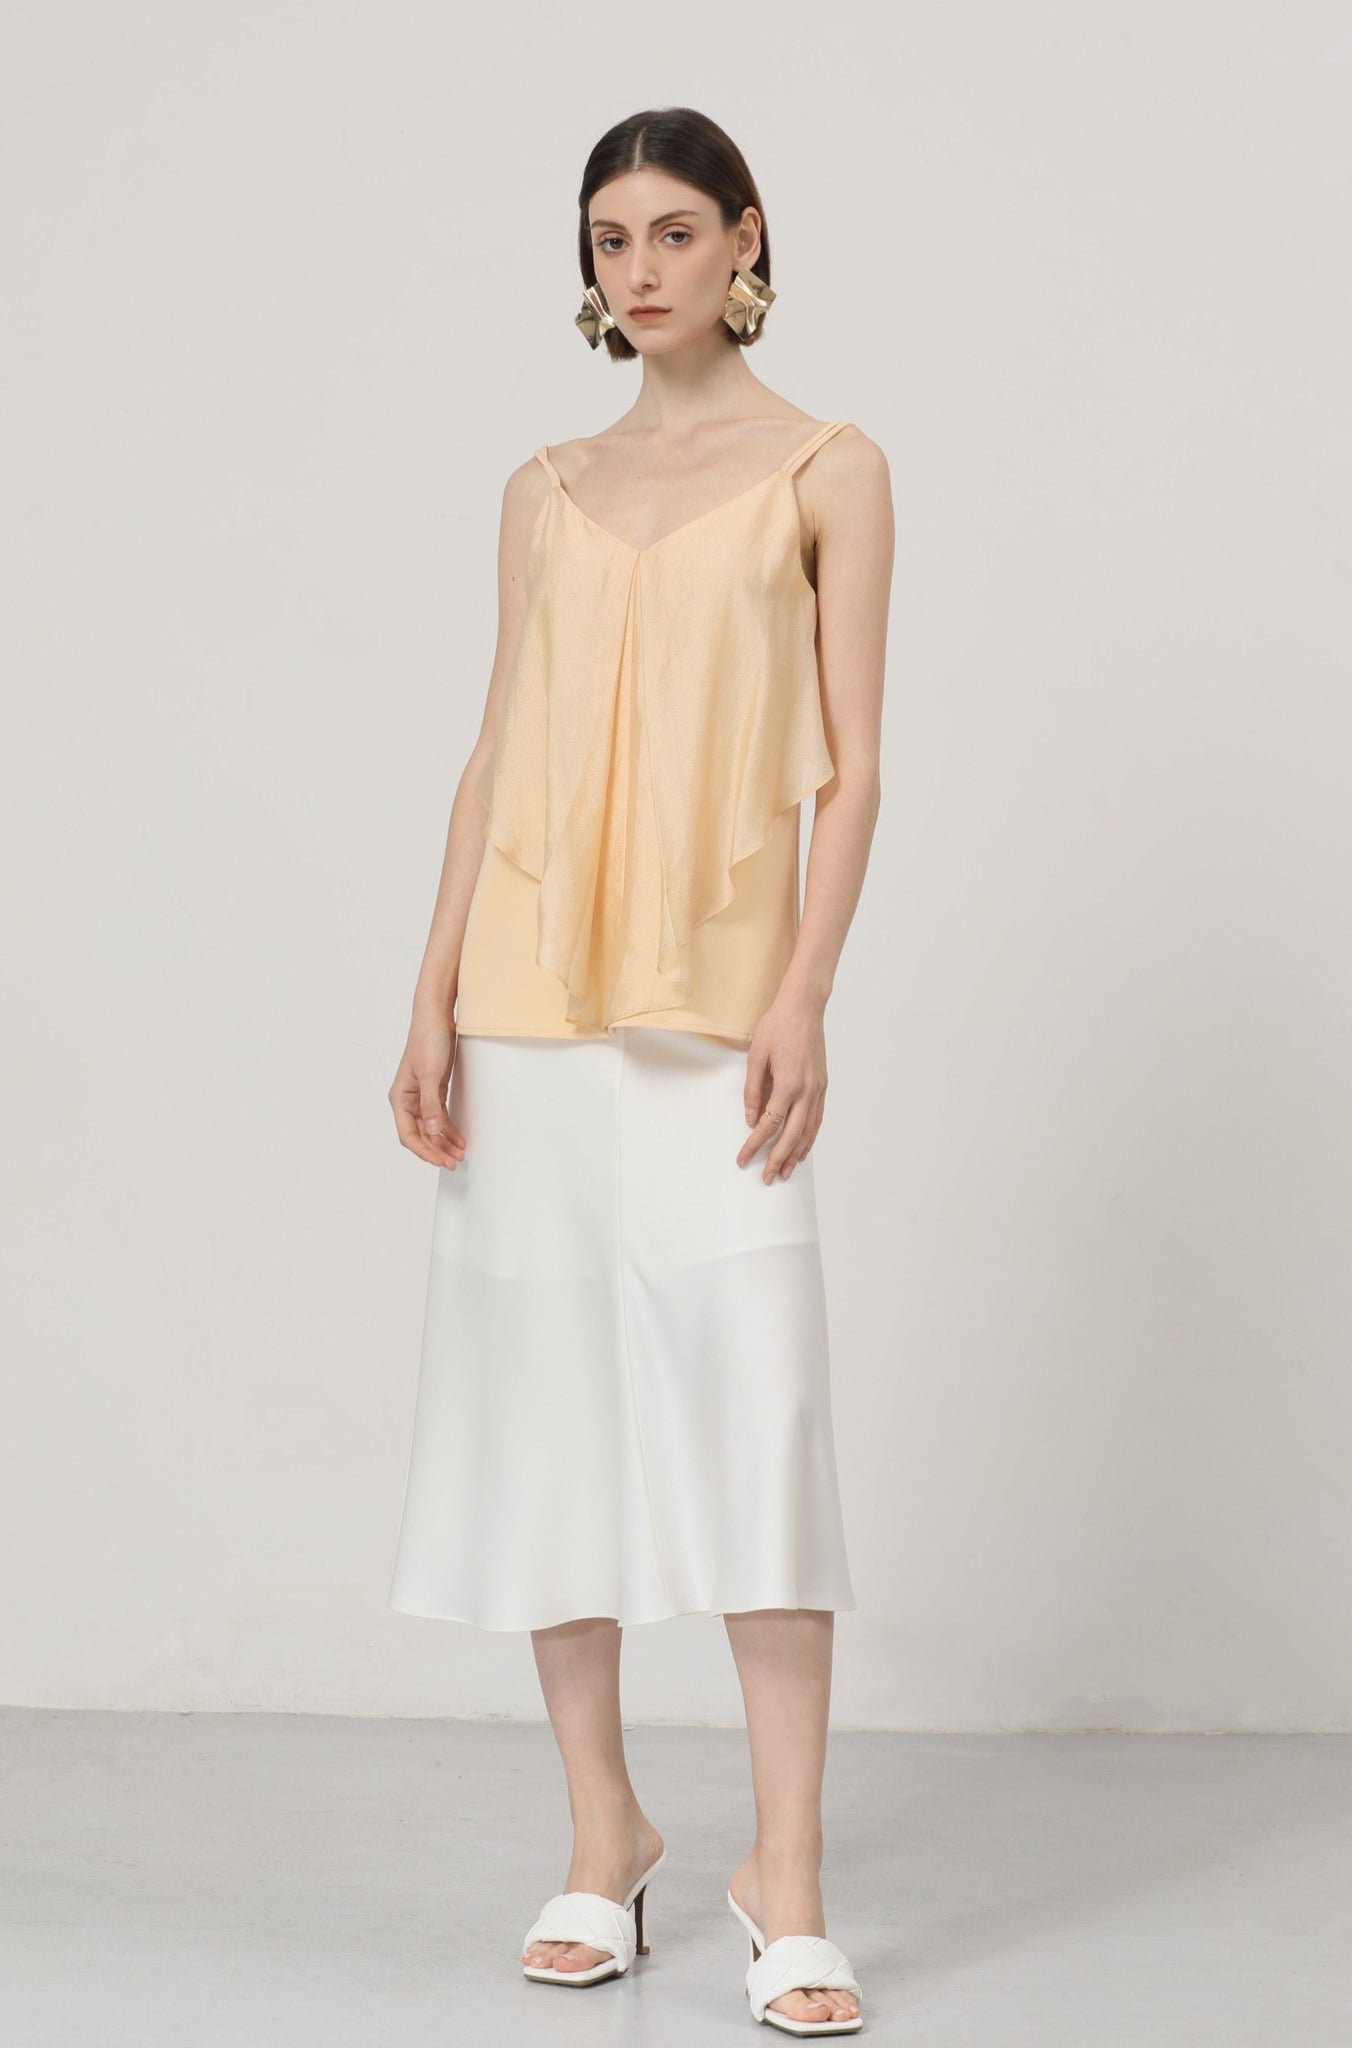 LINDONG | Sybille Yellow Layering Suspender Top